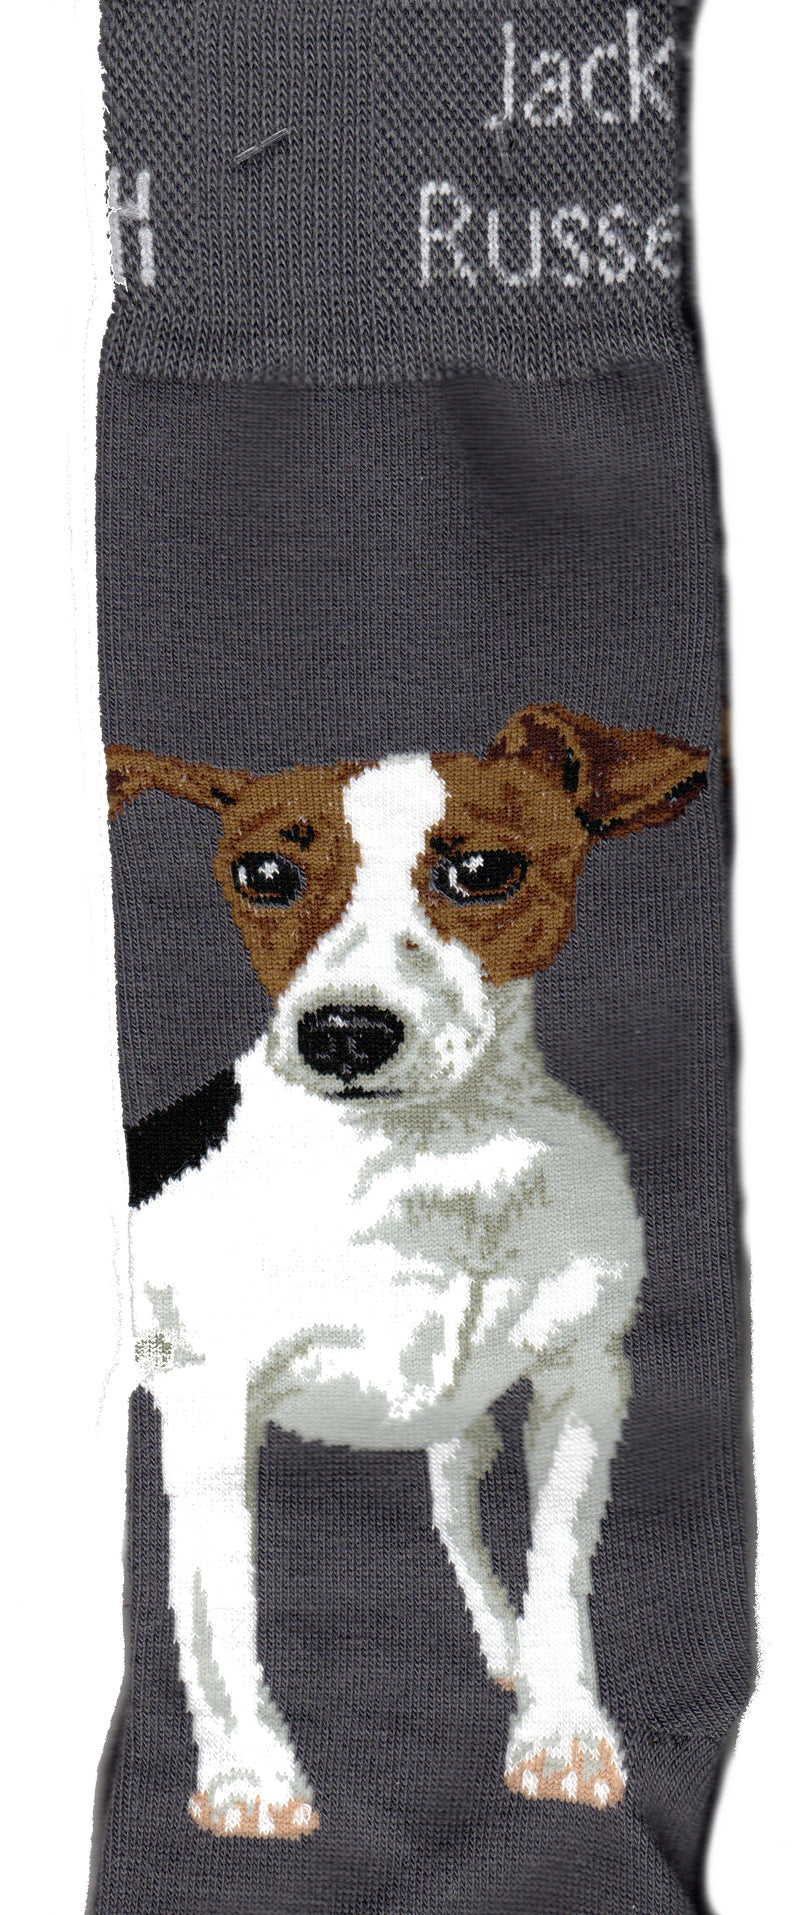 The For Bare Feet Realistic Jack Russell Sock starts on a Charcoal background. The Jack Russell is standing at the top of the foot ready to play. He is White, Light and Medium Greys showing Highlights and Shadows. Blacks are Patches, Nose, Mouth and Eyes. The Face is Russet and Seal Brown.